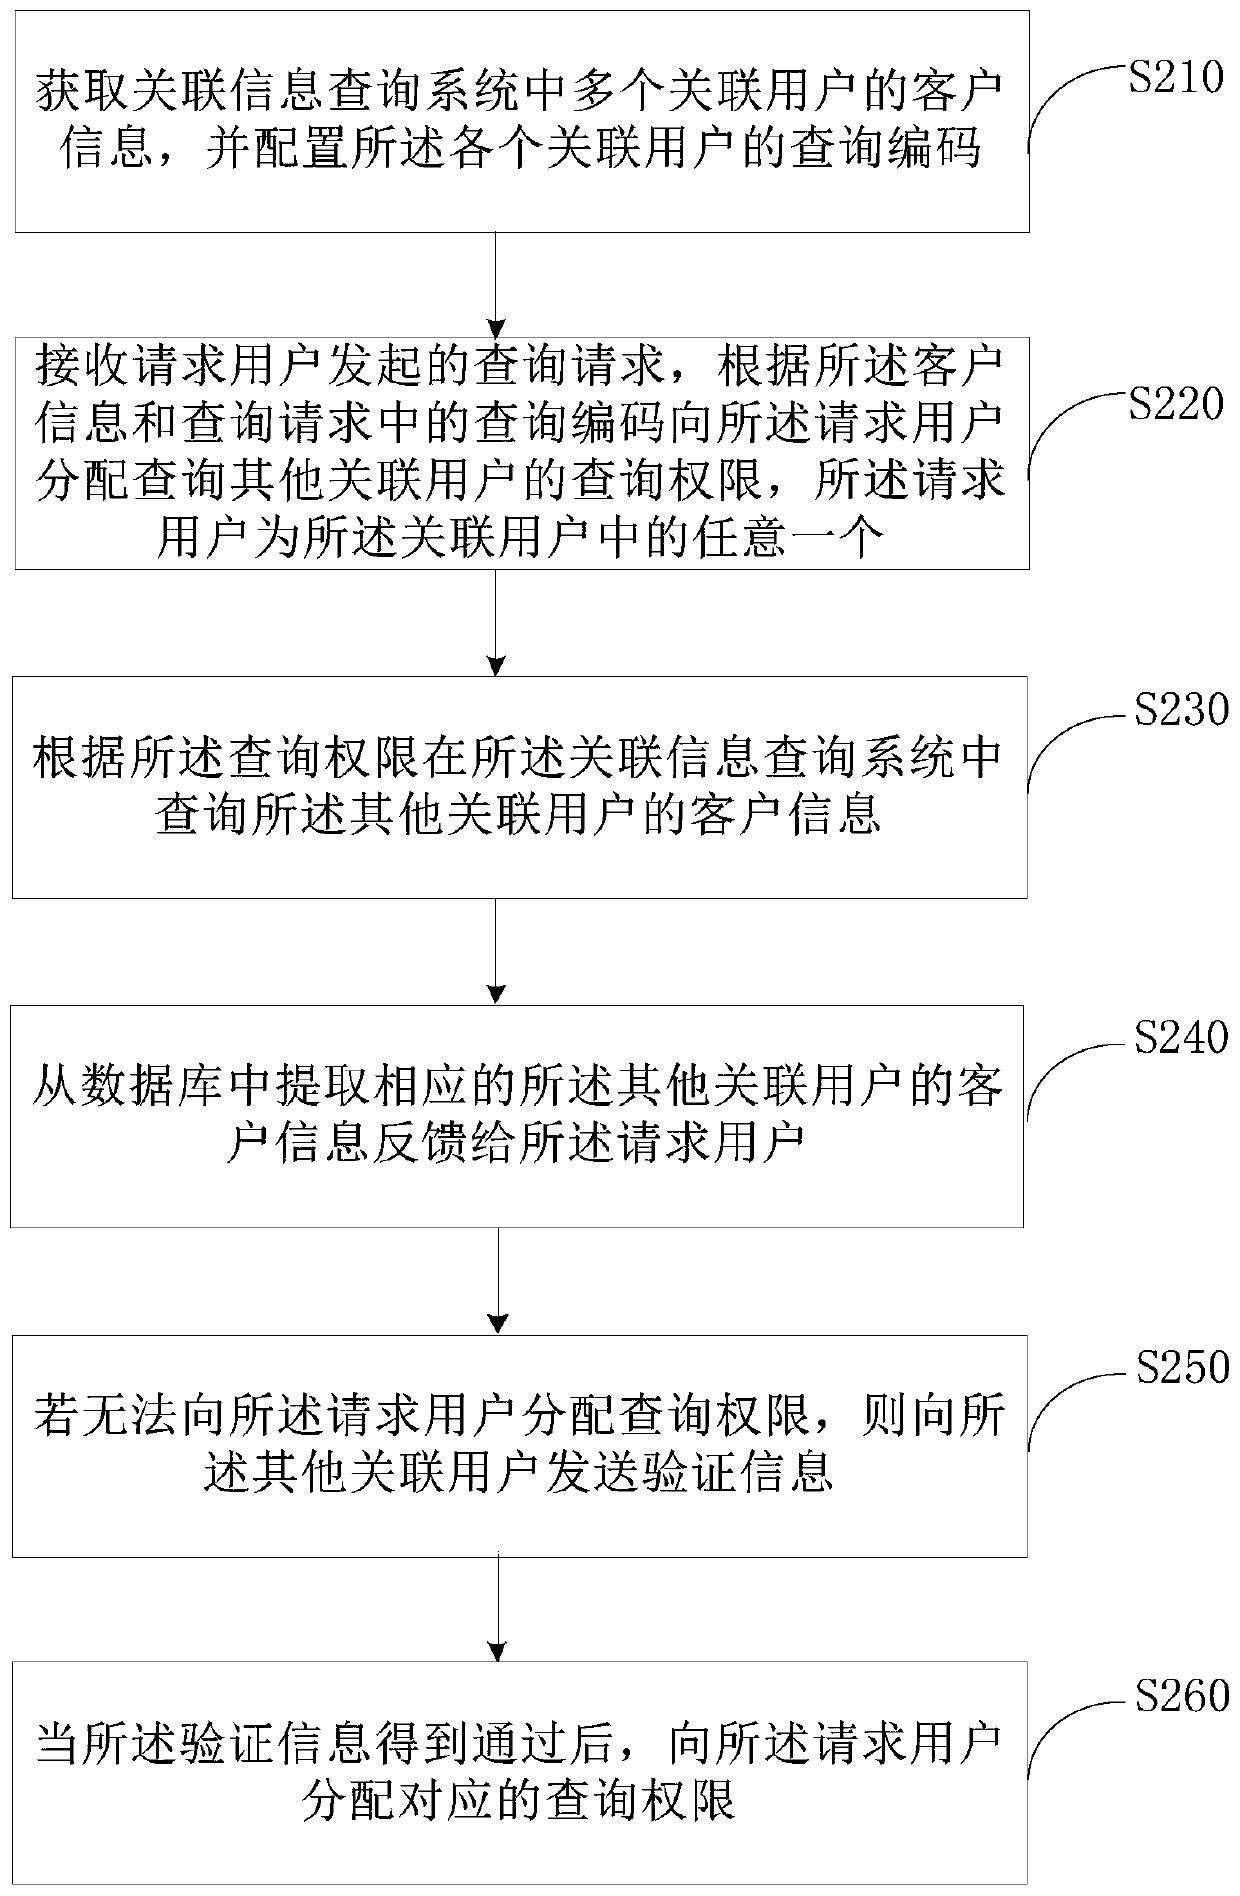 Associated information query method and device